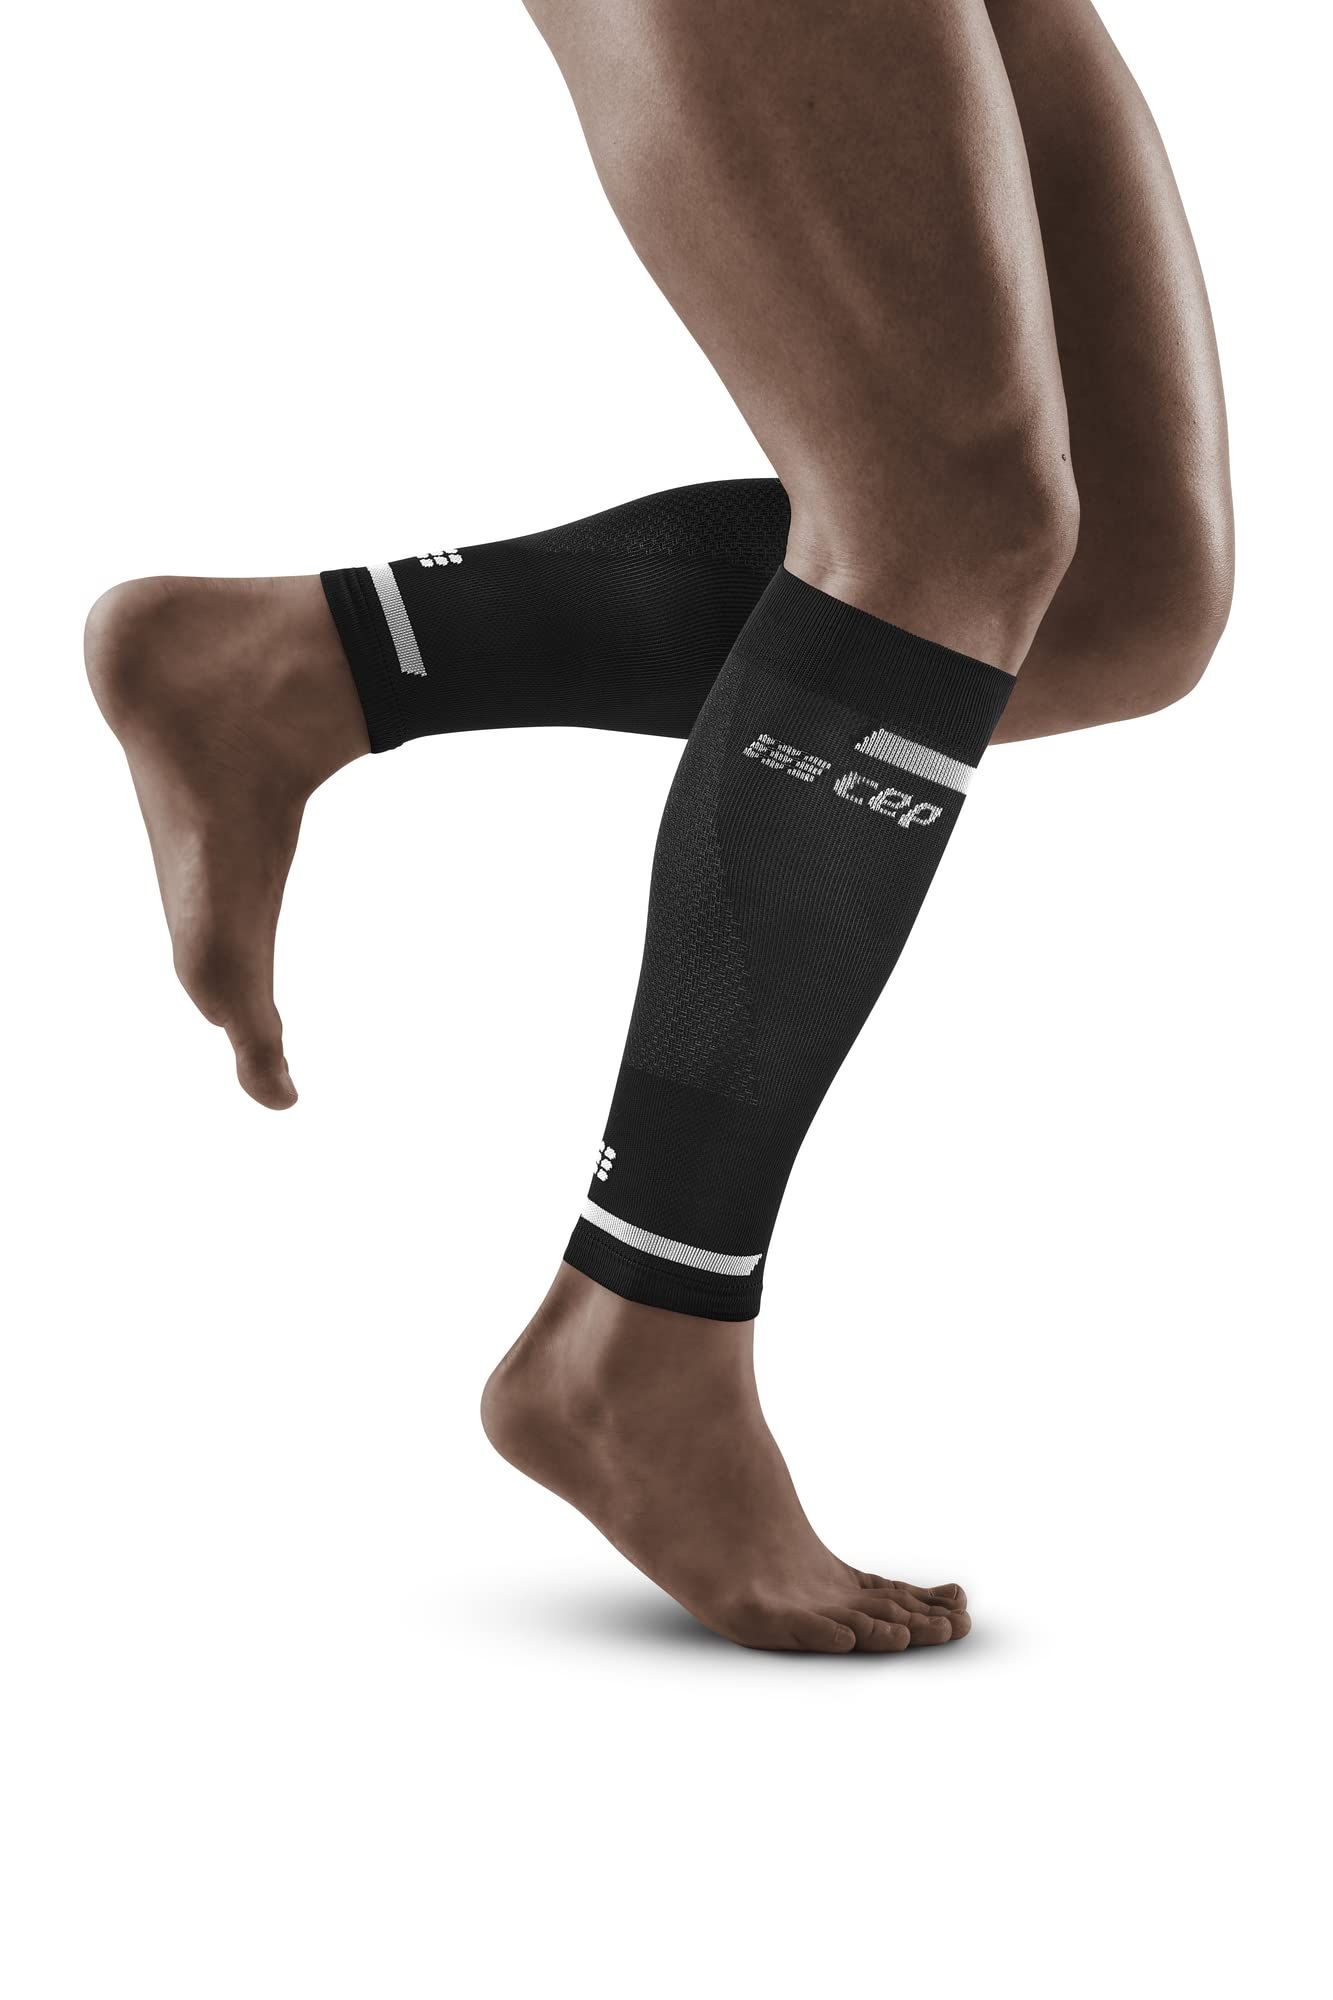 The 3 Best Calf Sleeves of 2023 - Compression Sleeves for Runners